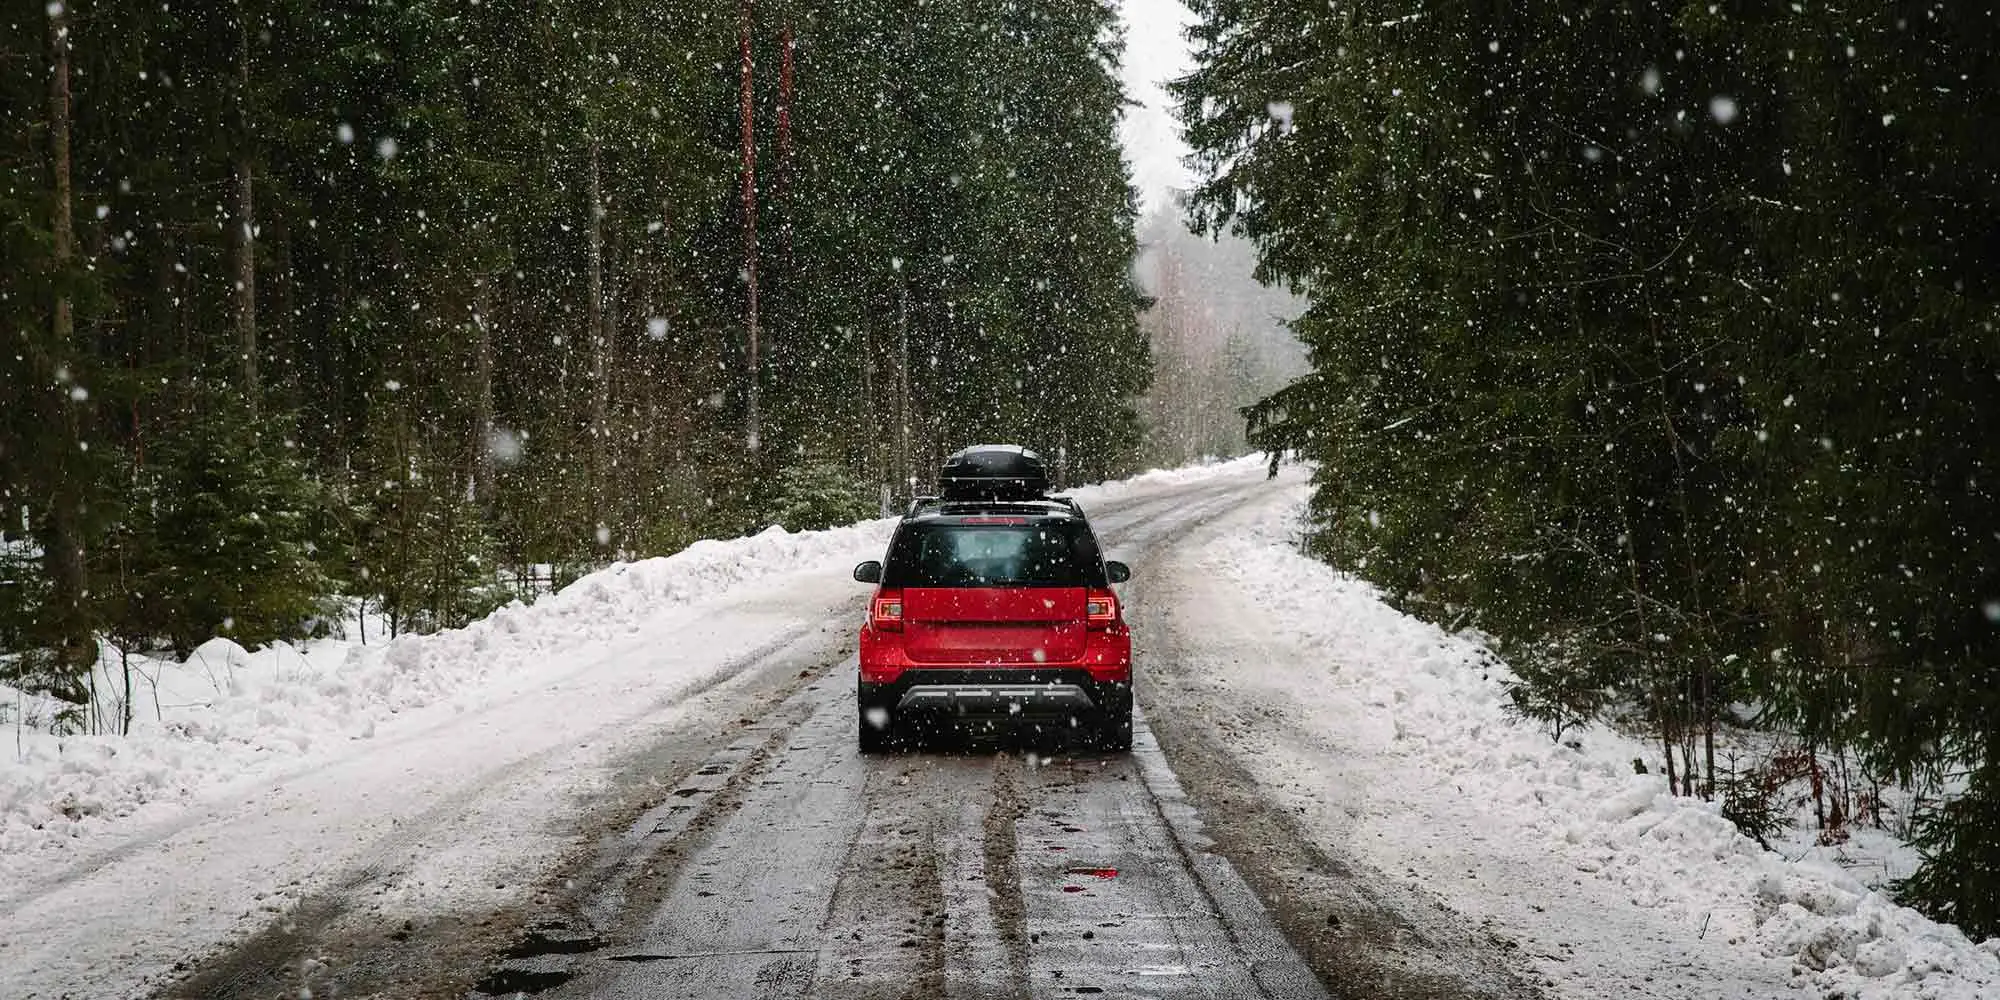 Top Ten Tips for Driving Safely in Winter Weather